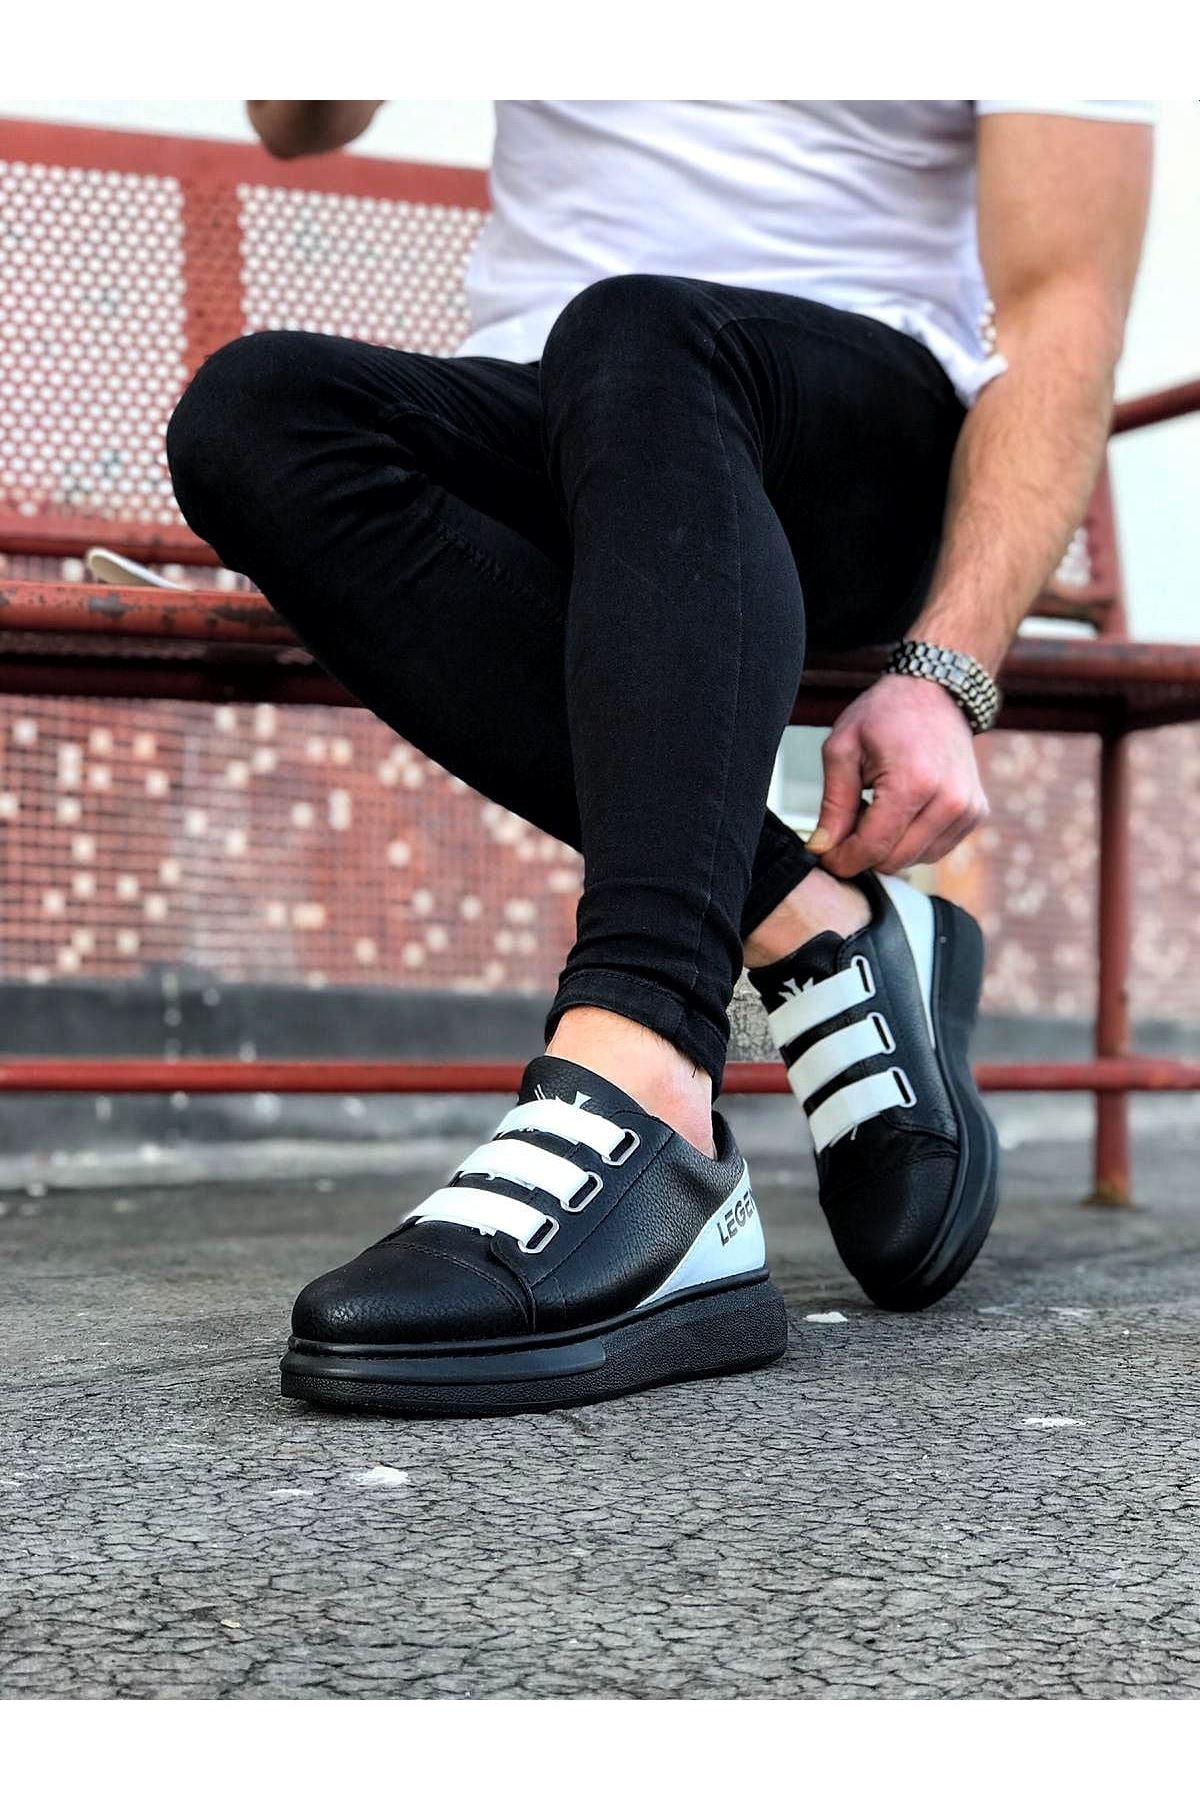 WG029 3-Stripes Legend Charcoal White Thick Sole Casual Men's Shoes sneakers - STREETMODE™